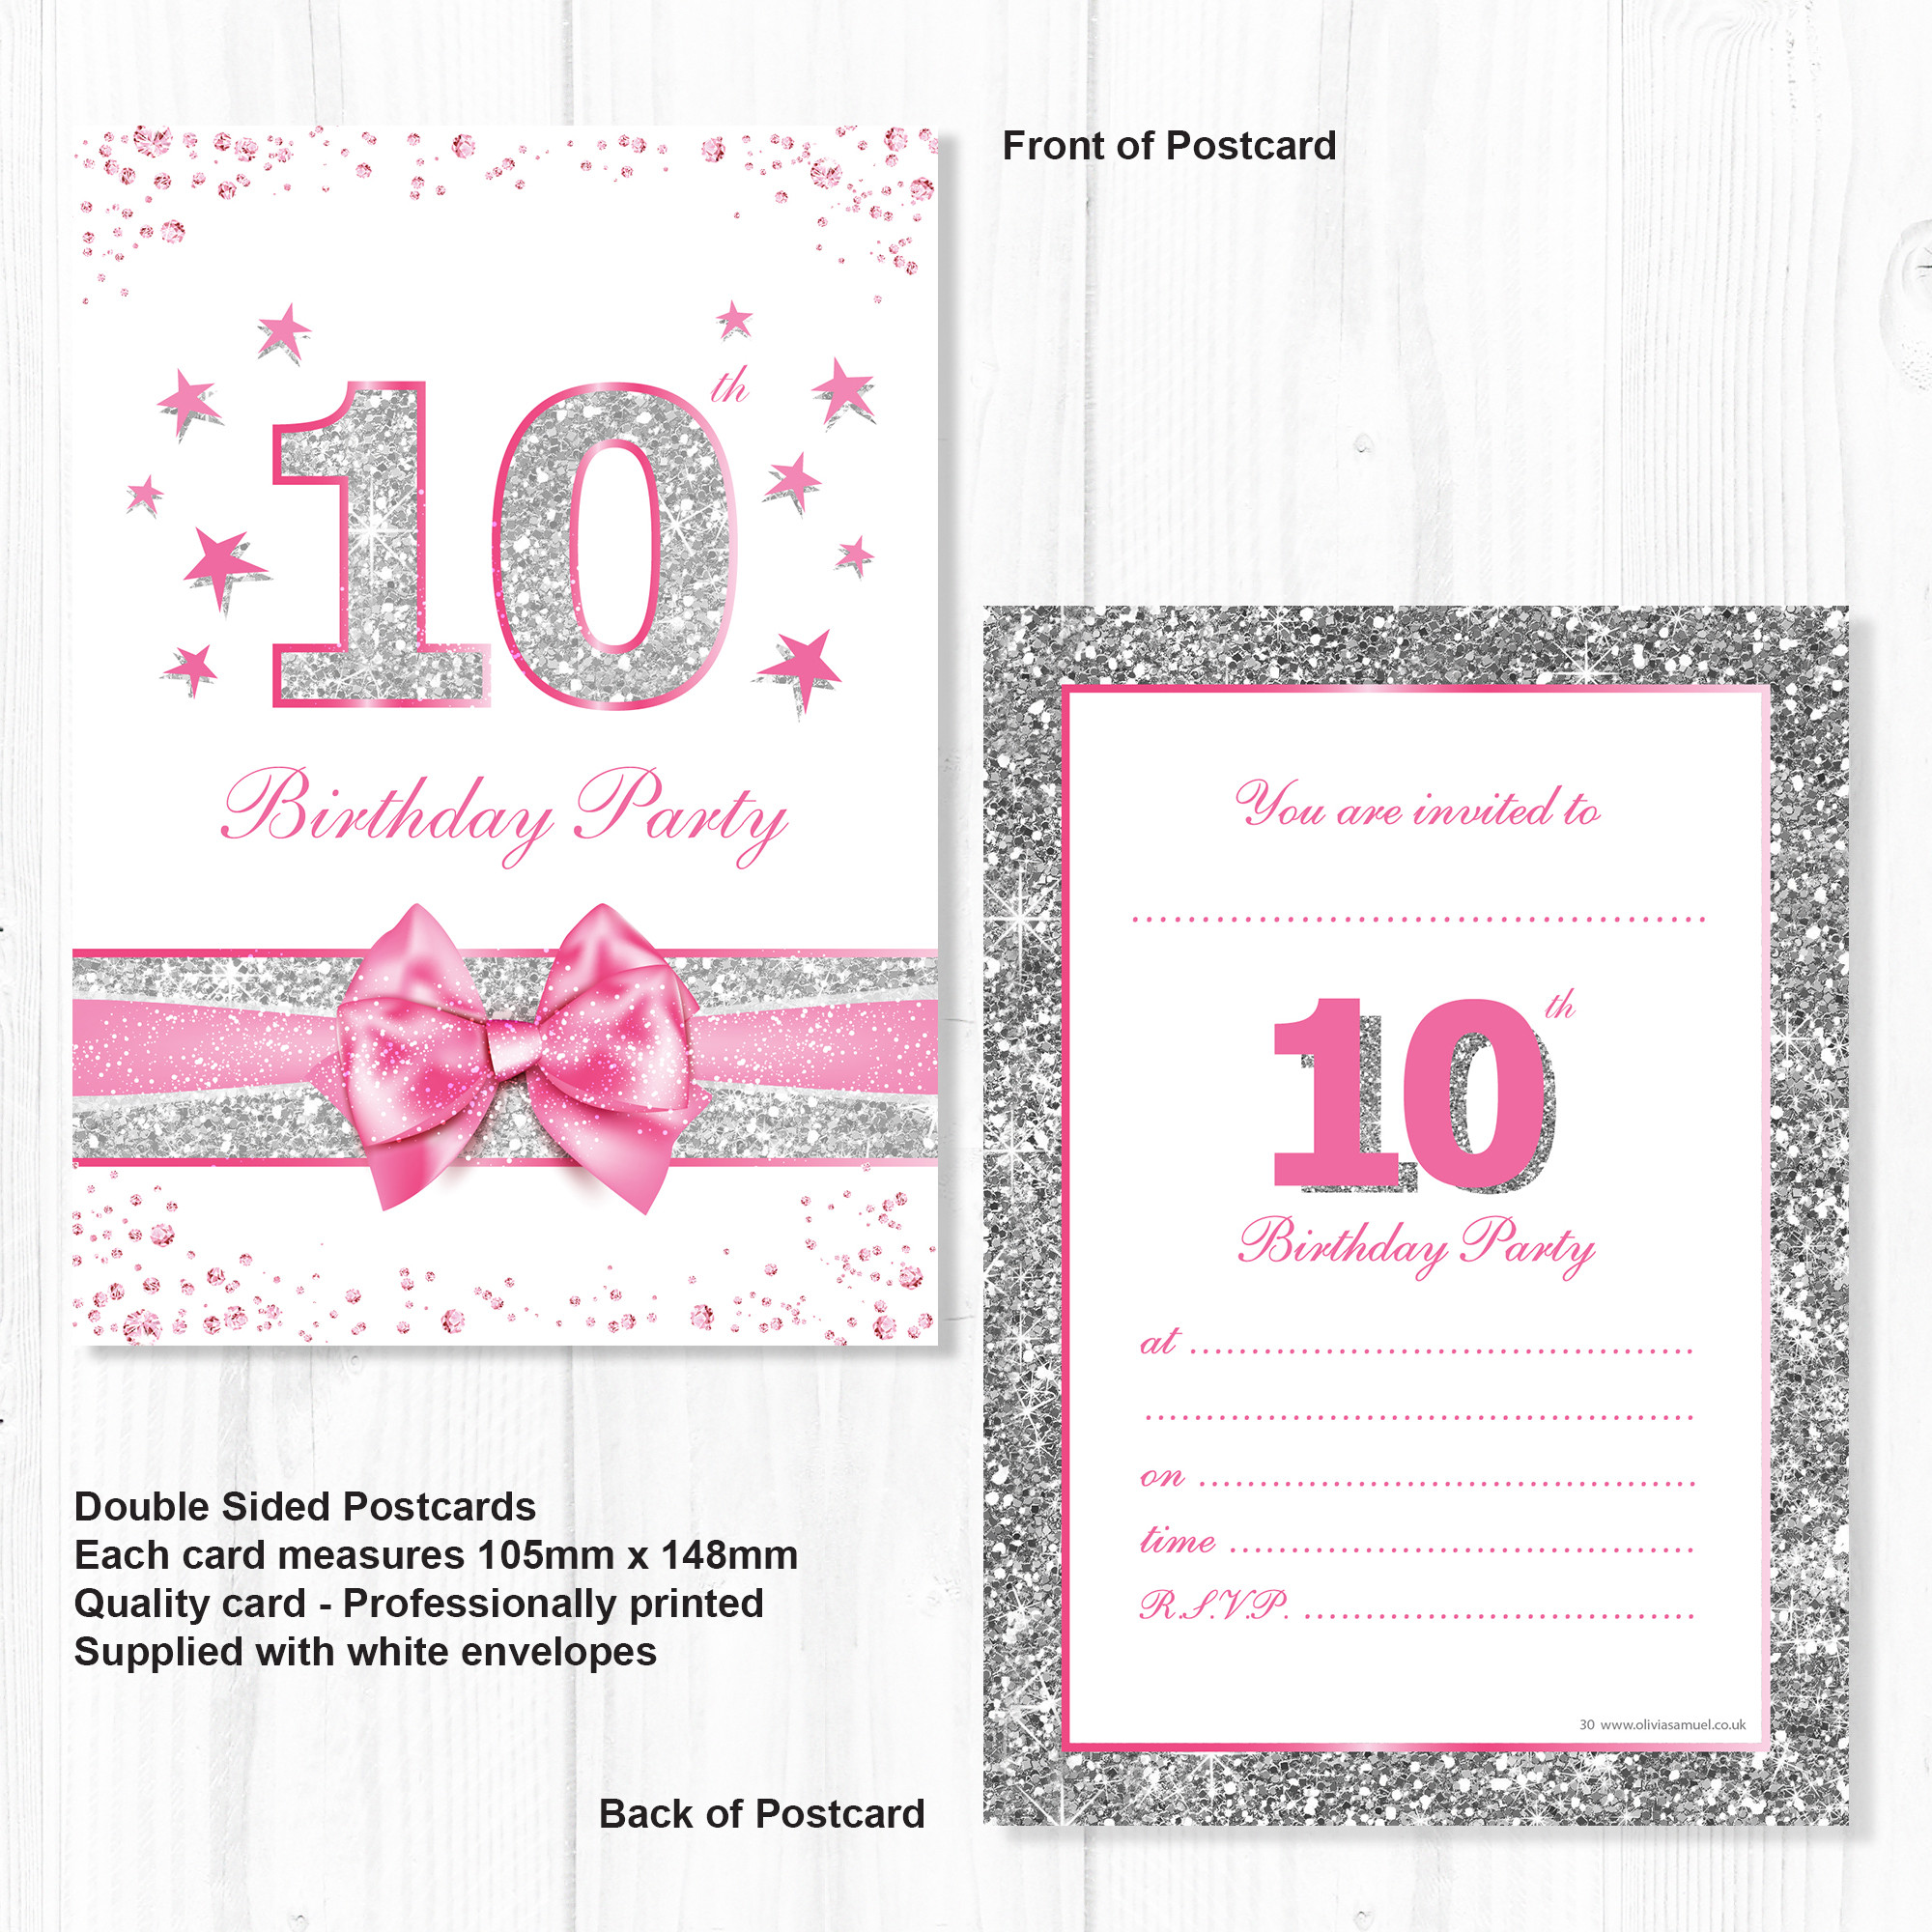 10th Birthday Invitations
 10th Birthday Party Invitations – Pink Sparkly Design and